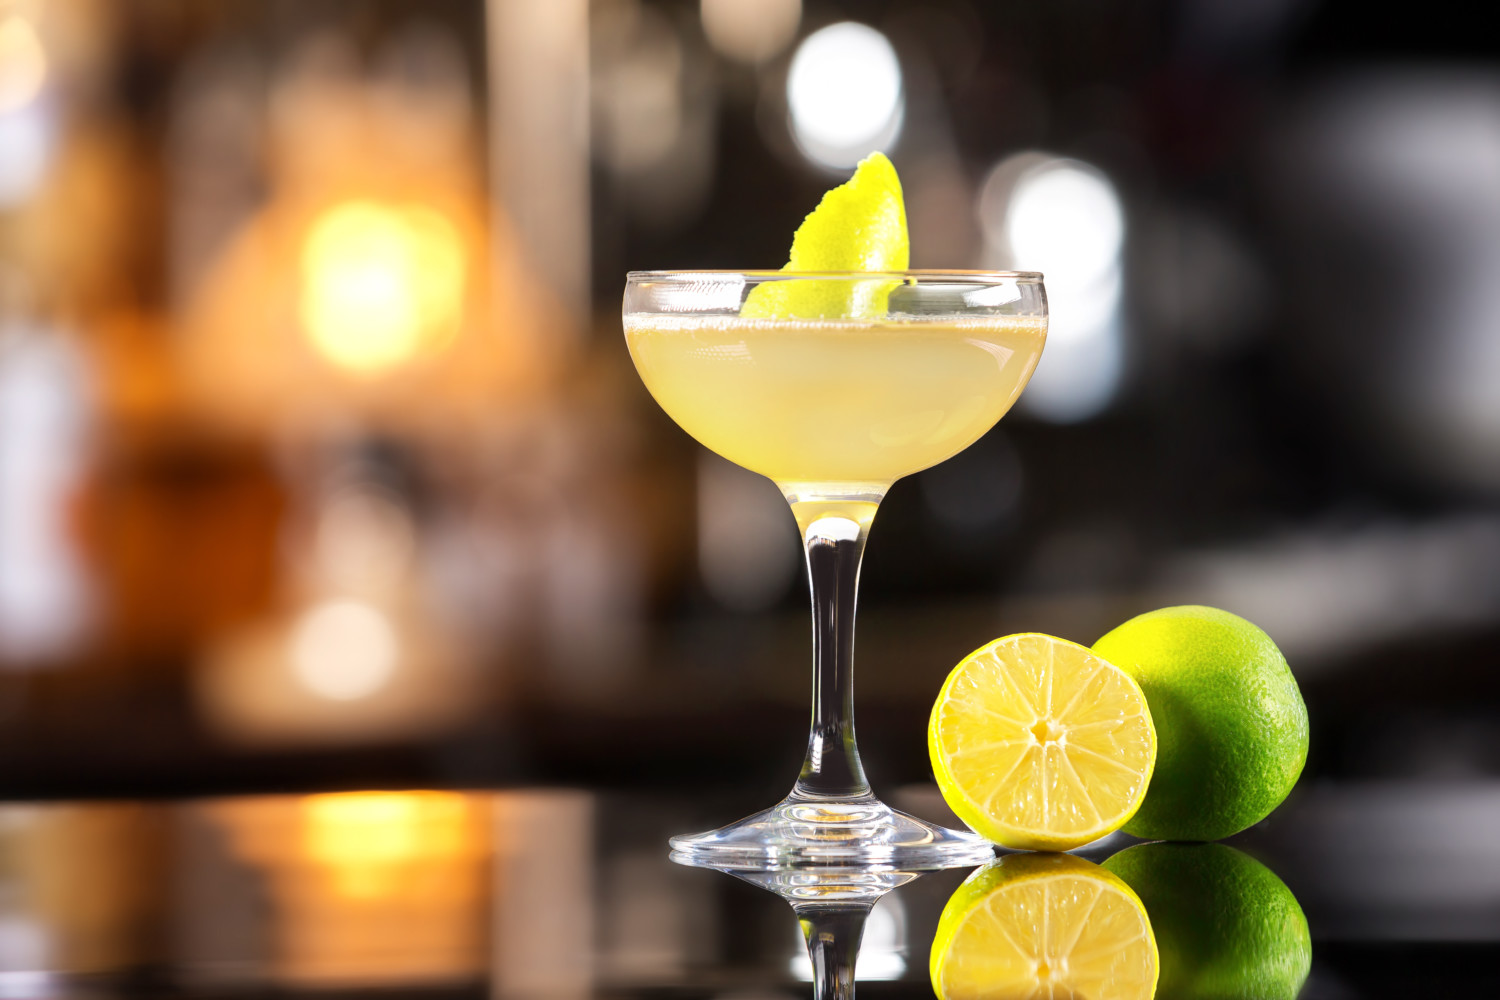 daiquiri - one of the most popular cocktails in the world